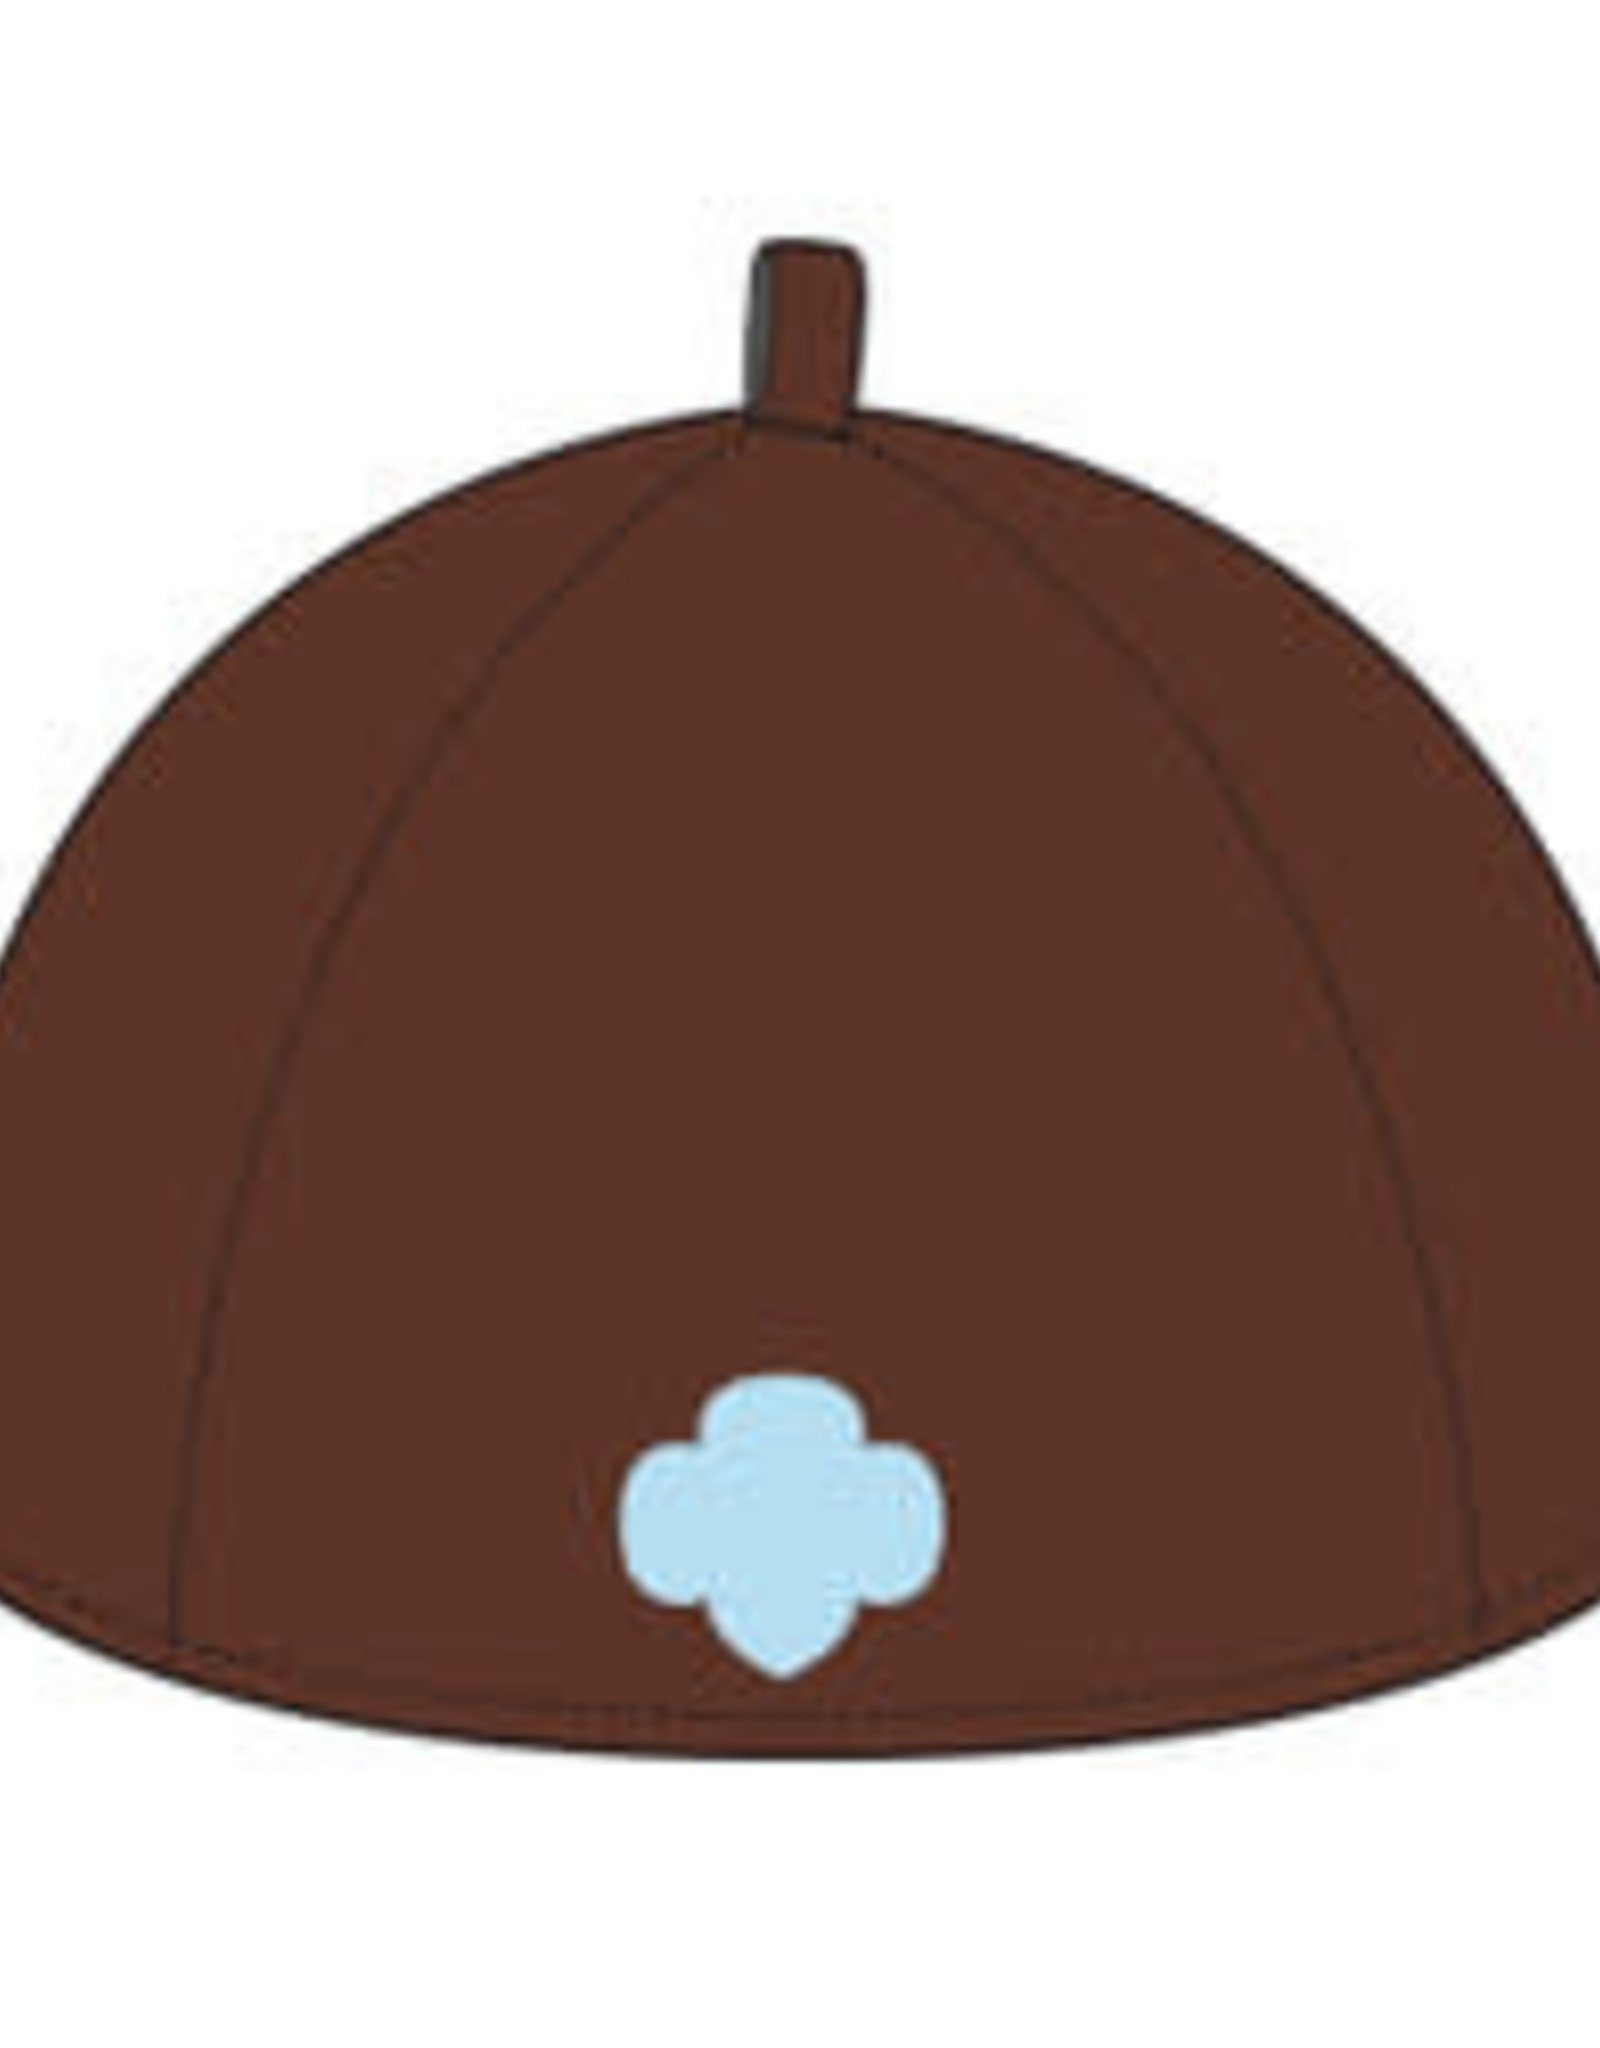 GIRL SCOUTS OF THE USA New Brownie Beanie